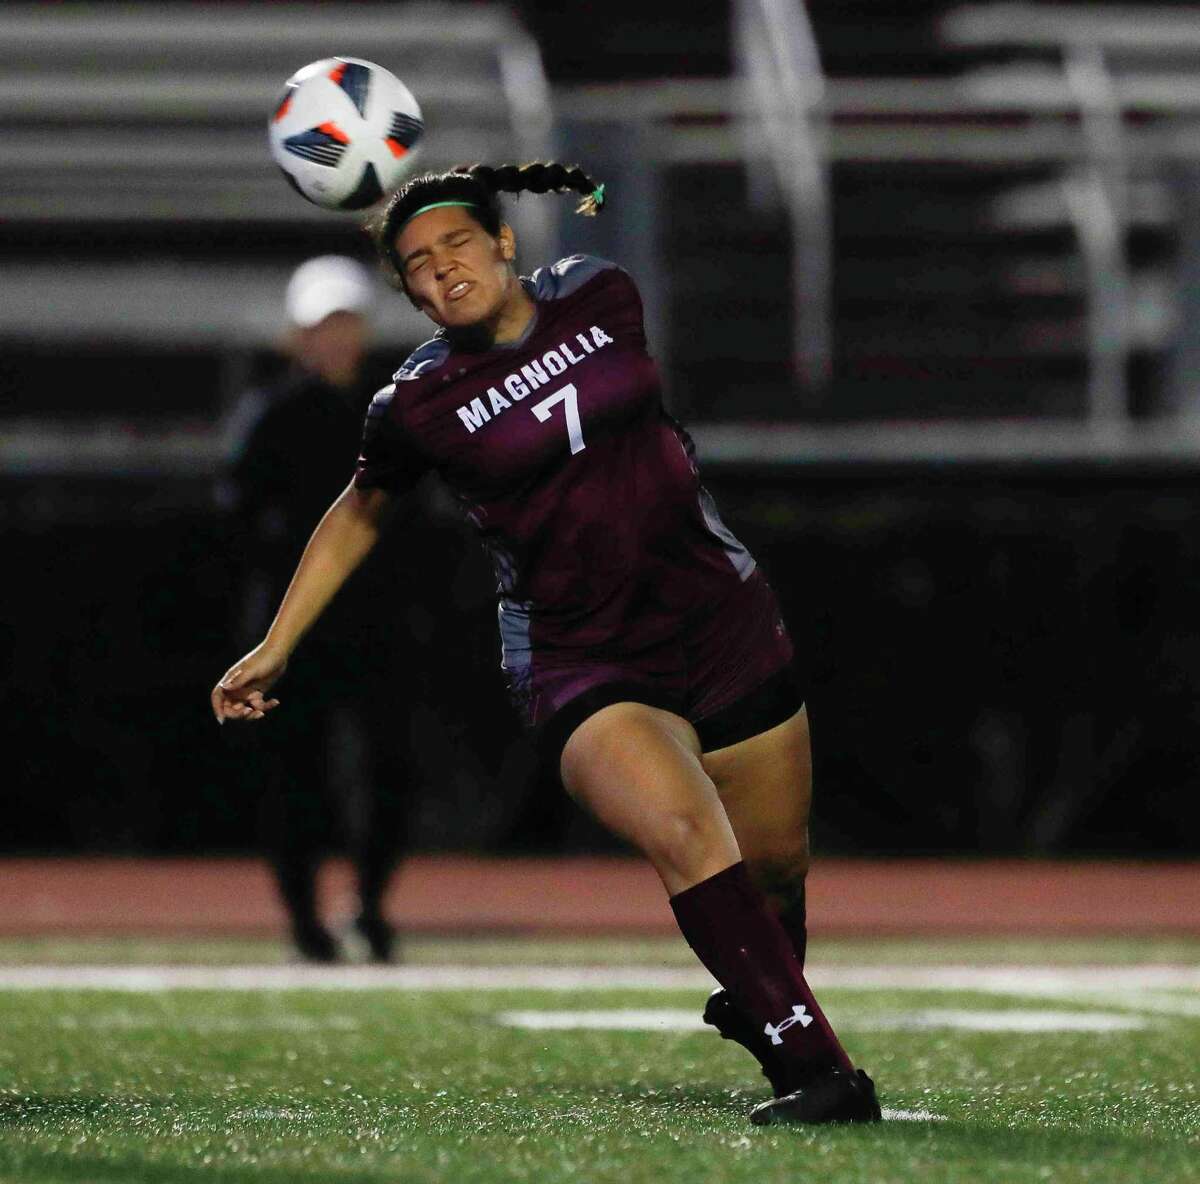 Magnolia’s Gabriella Palomino (7) heads the ball in the first half of a high school soccer match at Magnolia High School, Friday, March 4, 2022, in Magnolia.